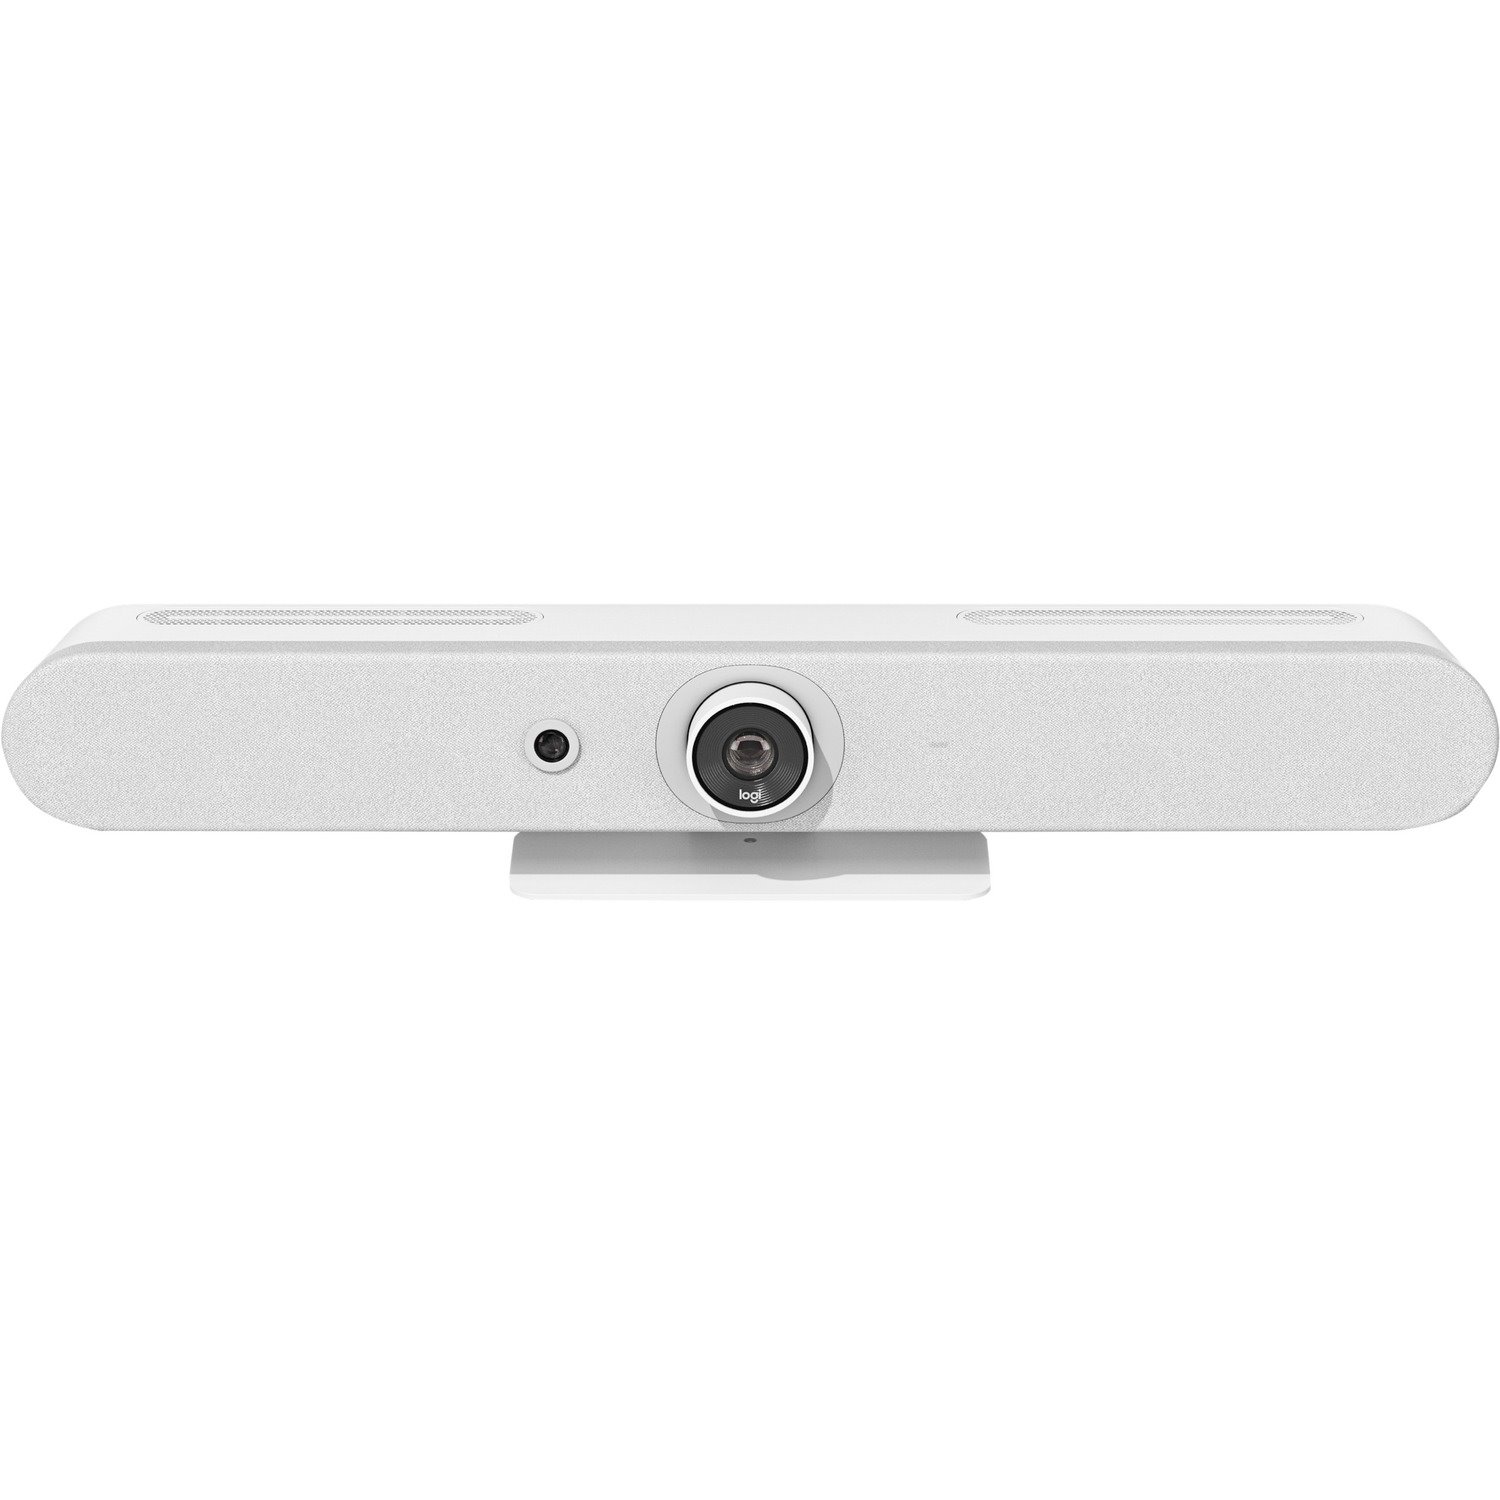 Logitech Rally Bar 960-001351 Video Conferencing Camera - 30 fps - White - USB 3.0